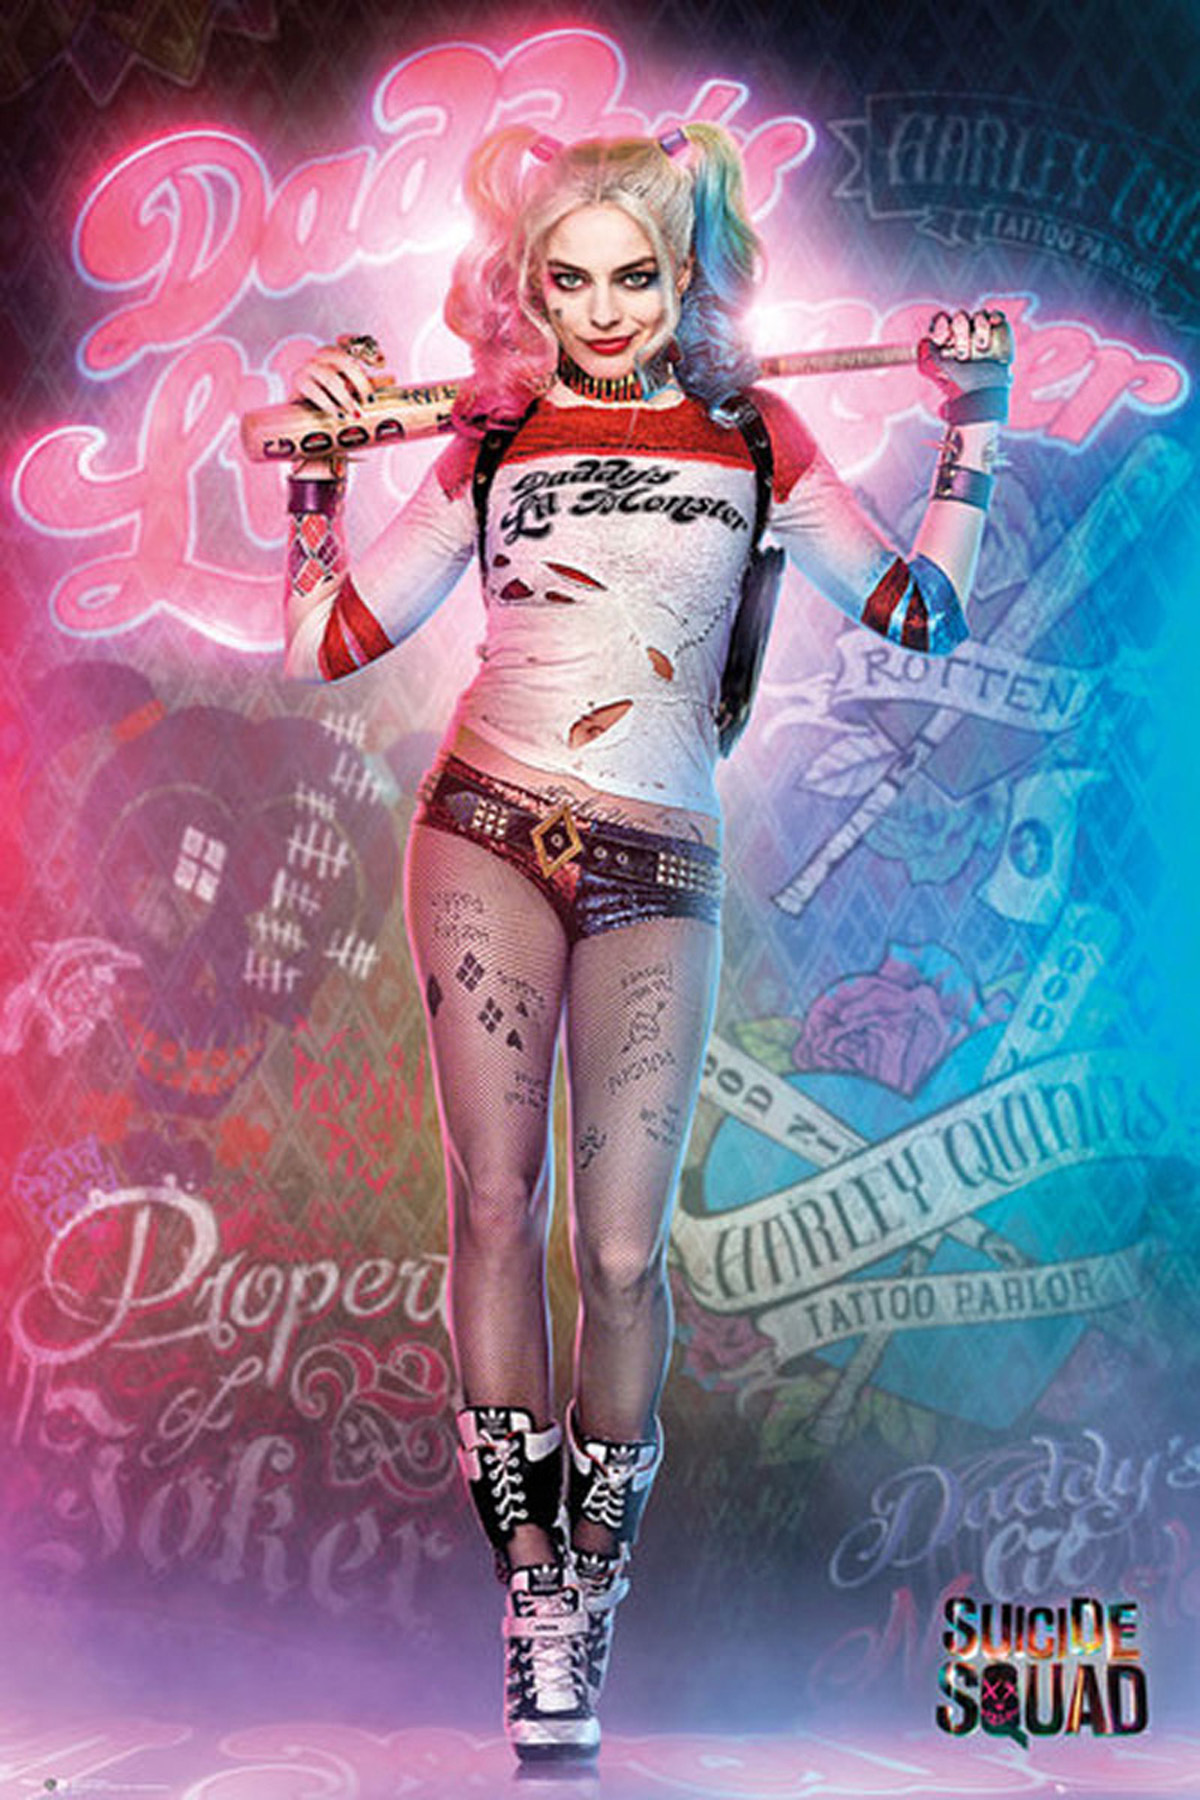 Stand - Suicide Quinn Squad Harley